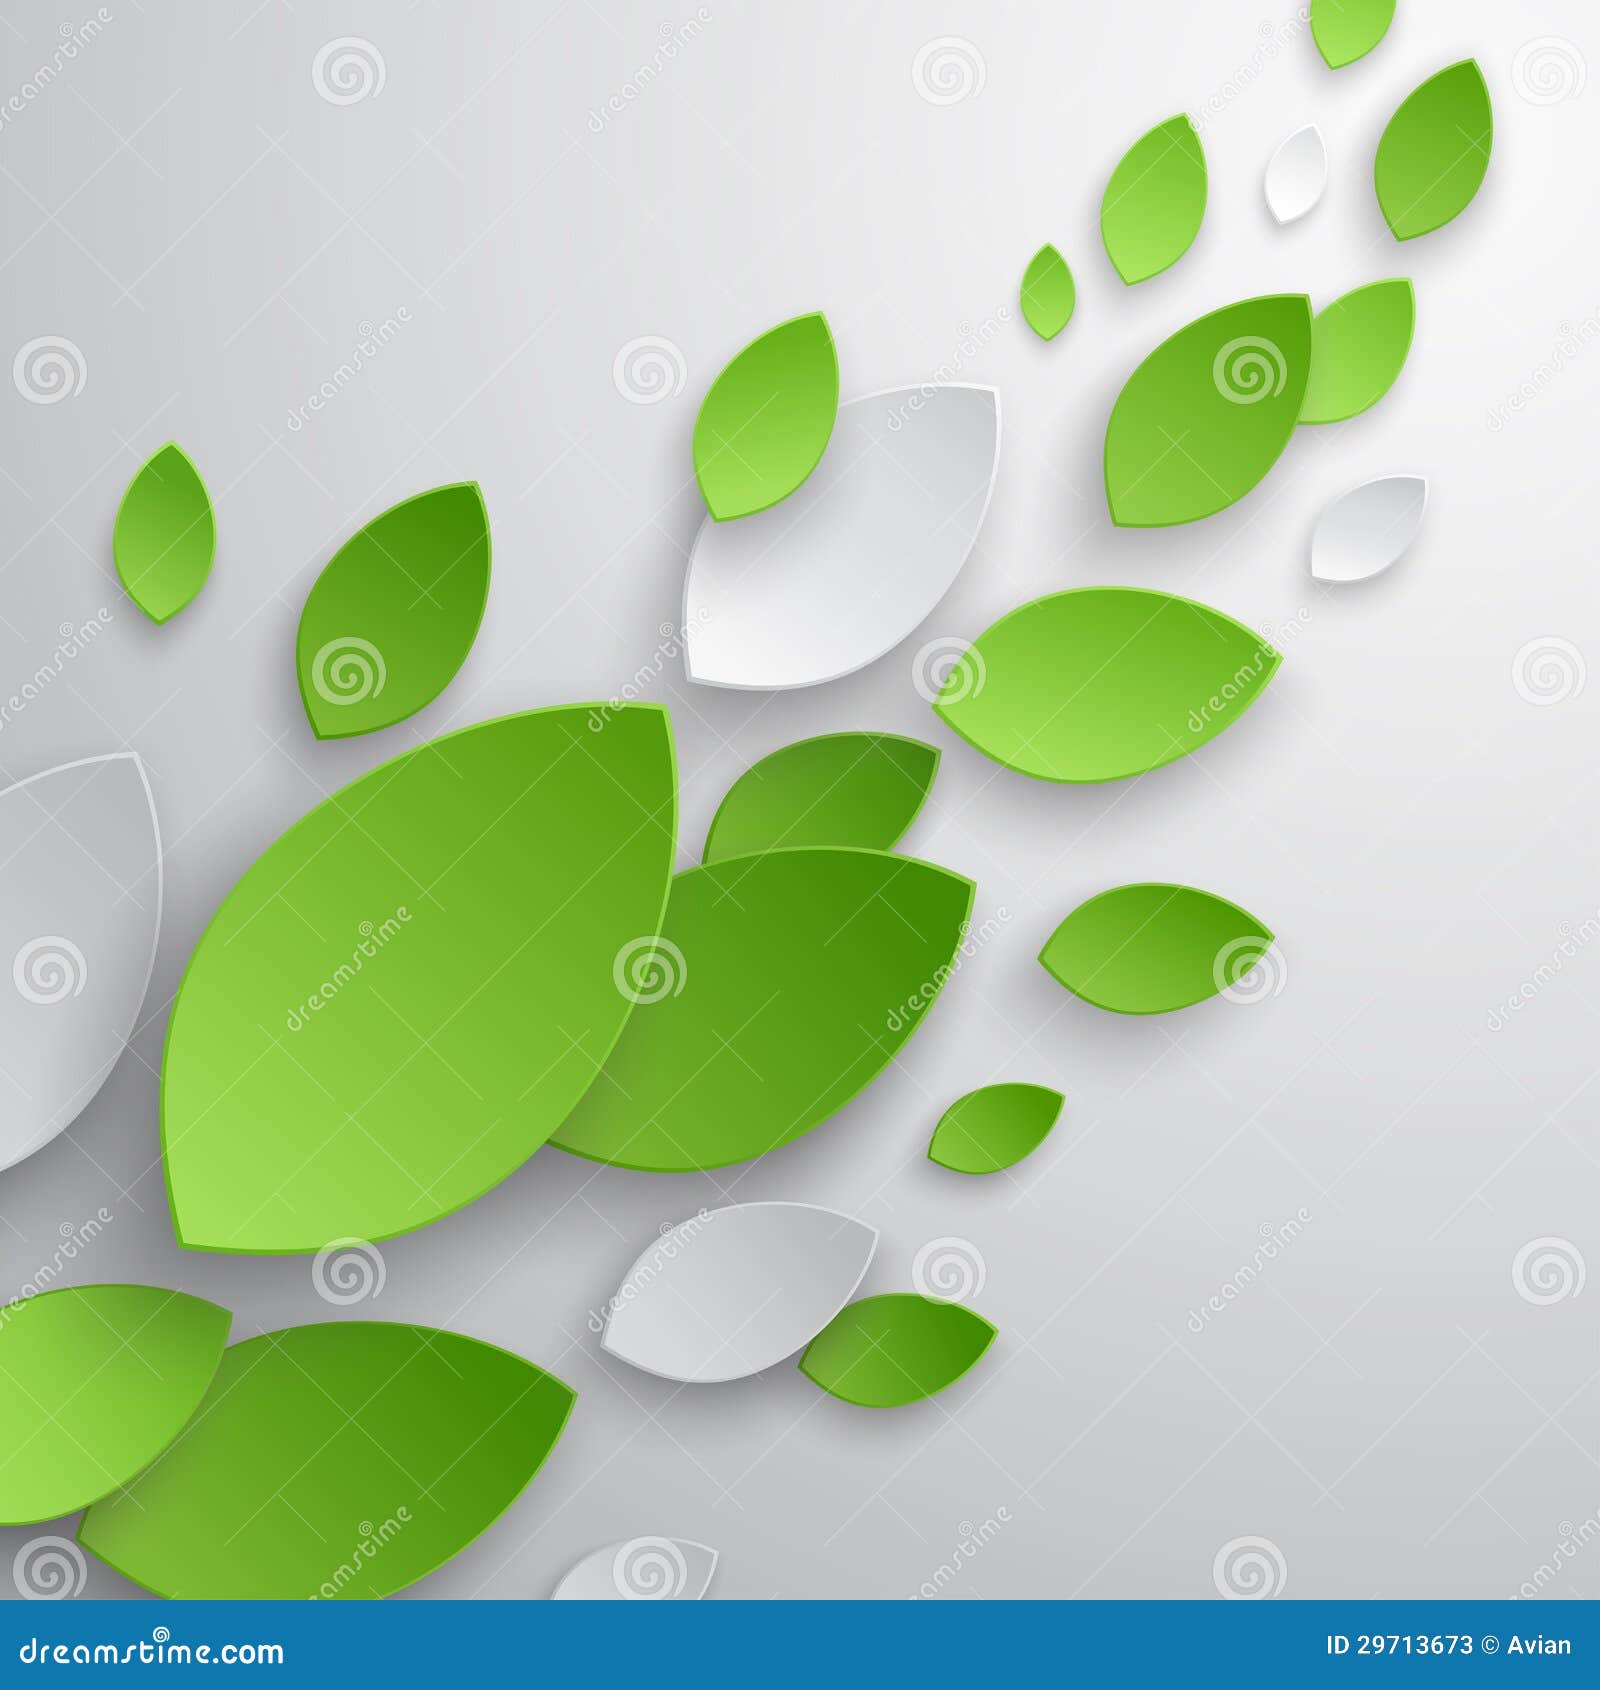 Green Leaves Abstract Background. Stock Vector - Illustration of ...